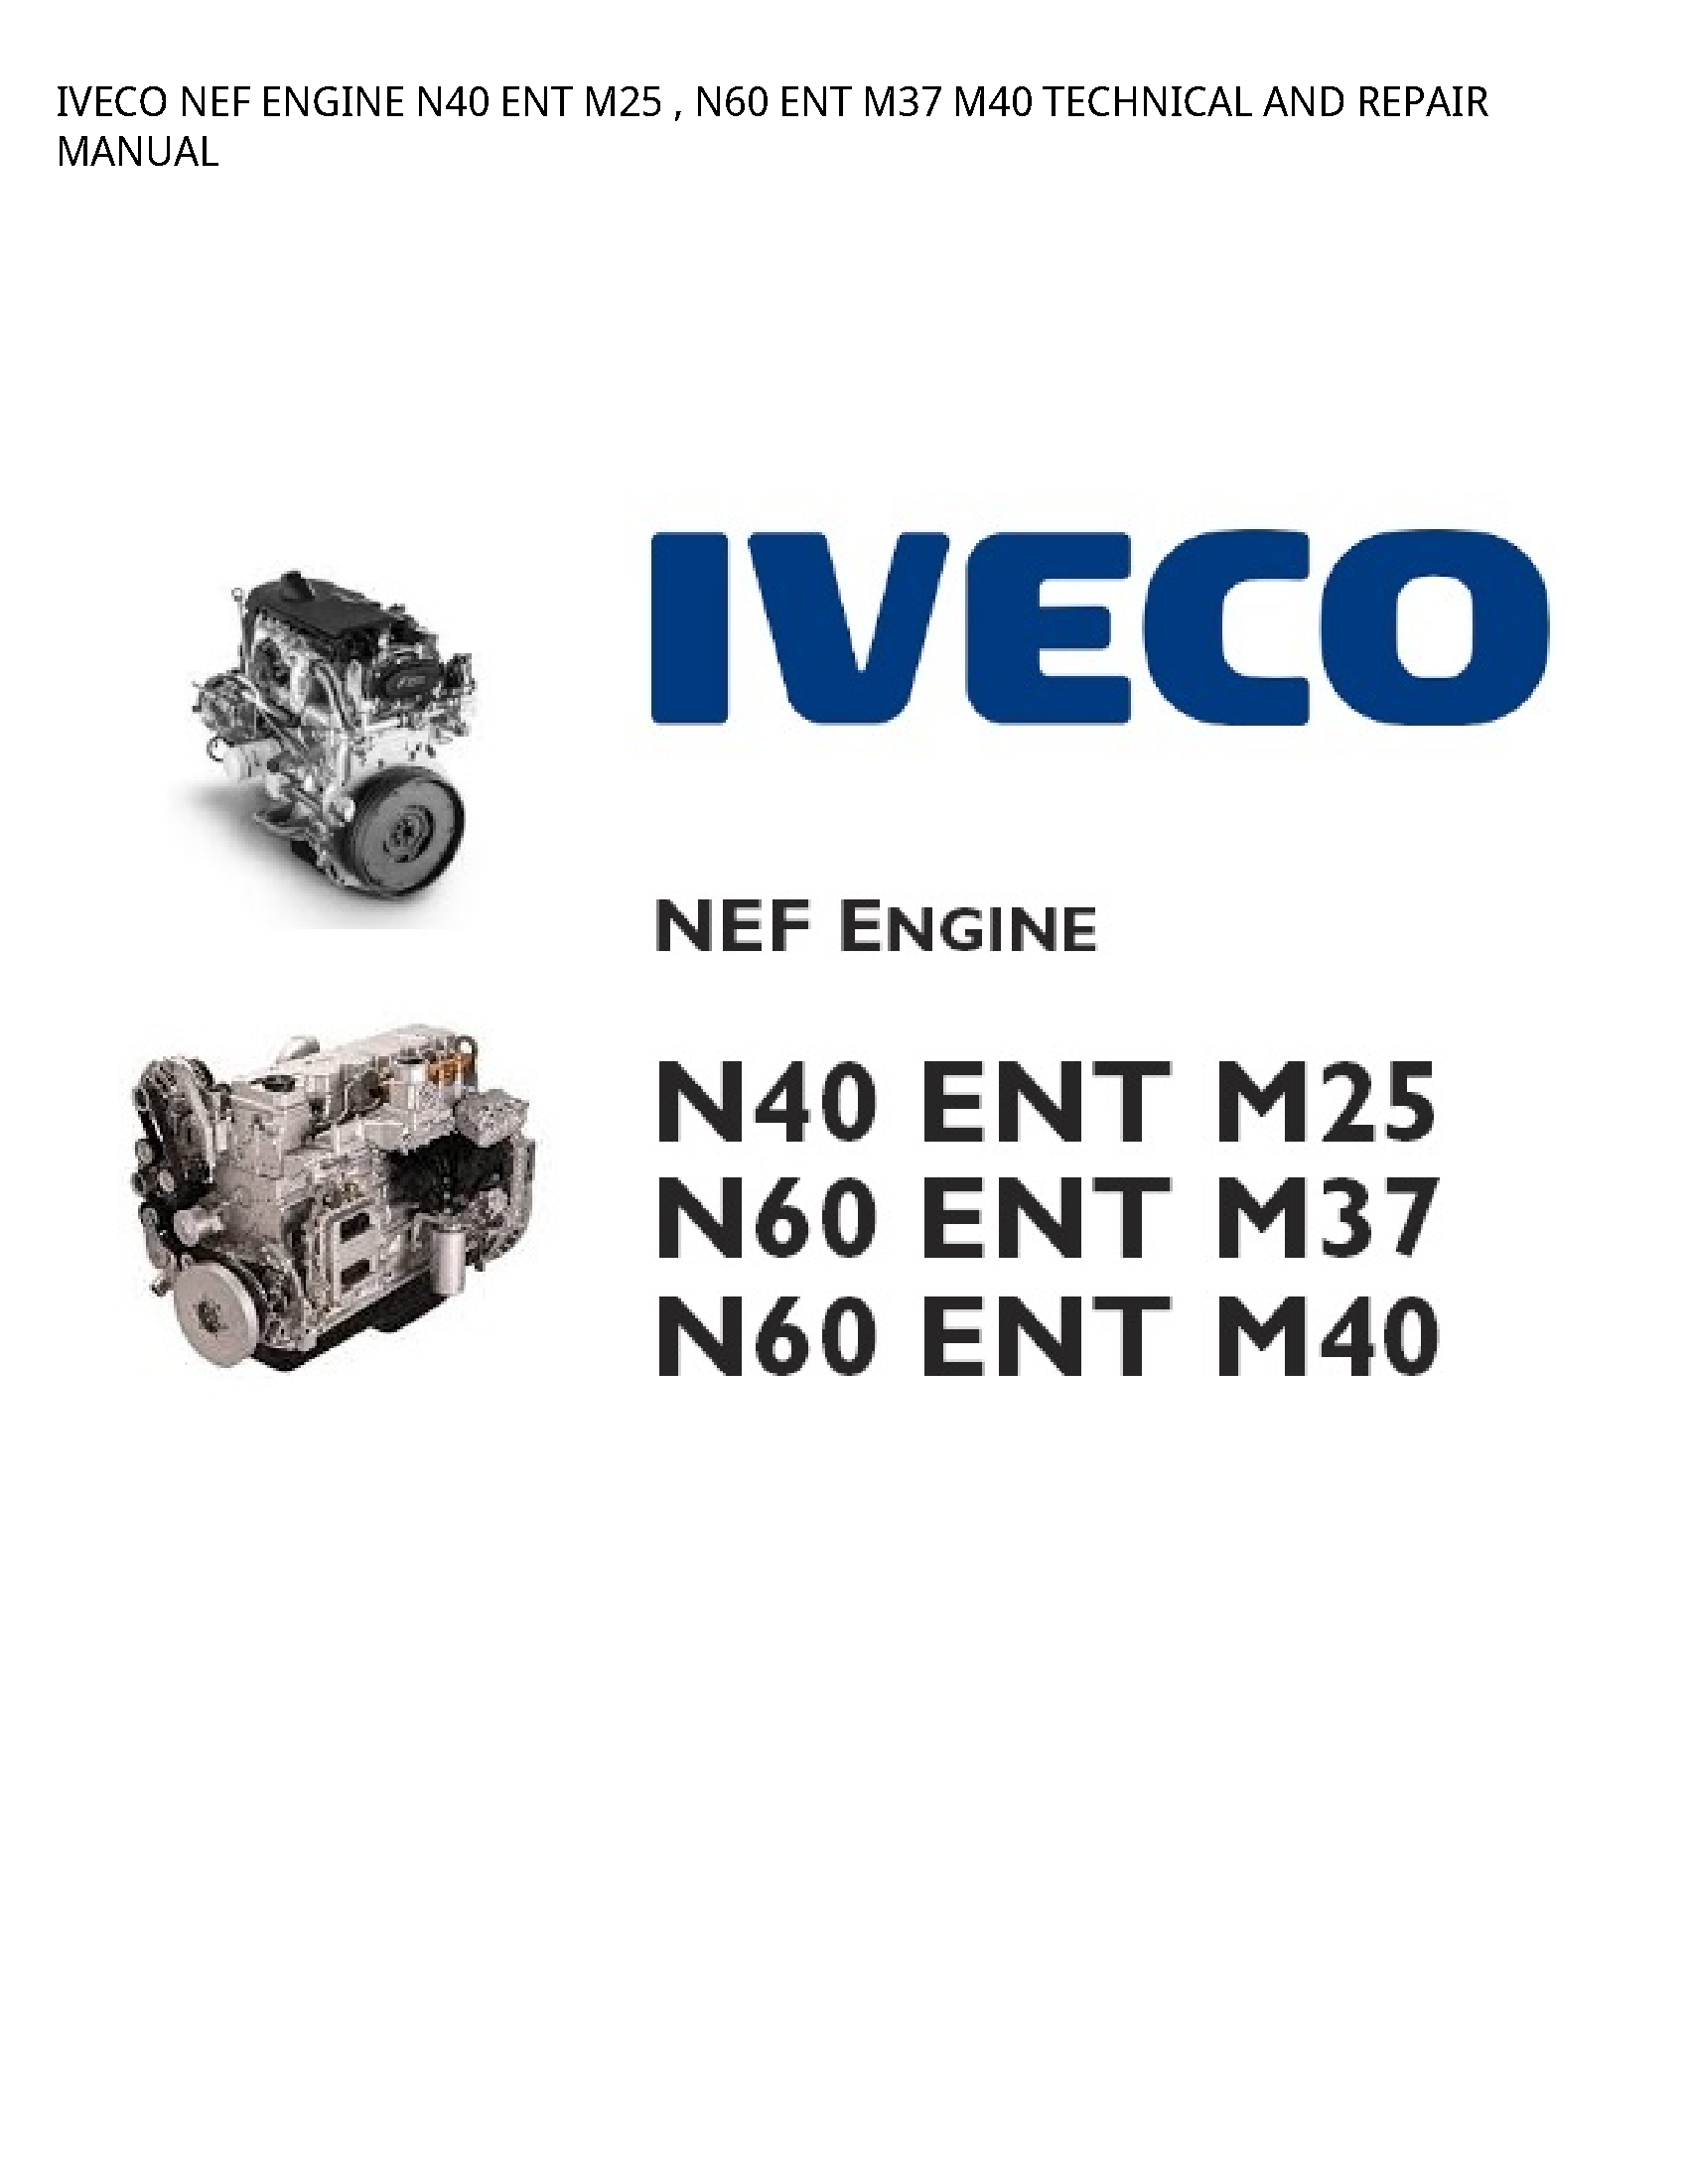 Iveco N40 NEF ENGINE ENT ENT TECHNICAL AND REPAIR manual